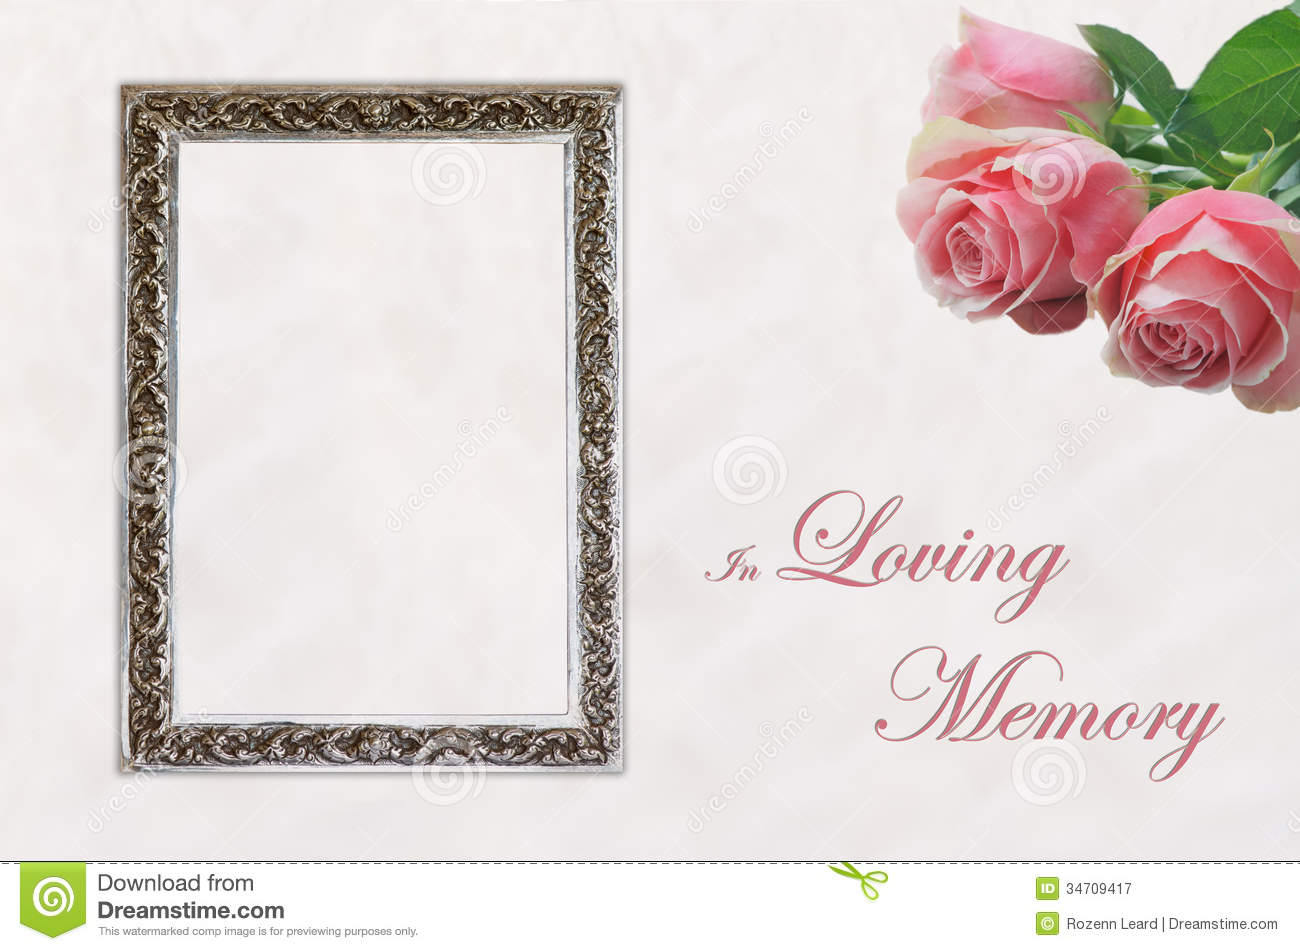 In Memory Cards Templates ] – Memory Template 4 Celebration With Regard To In Memory Cards Templates